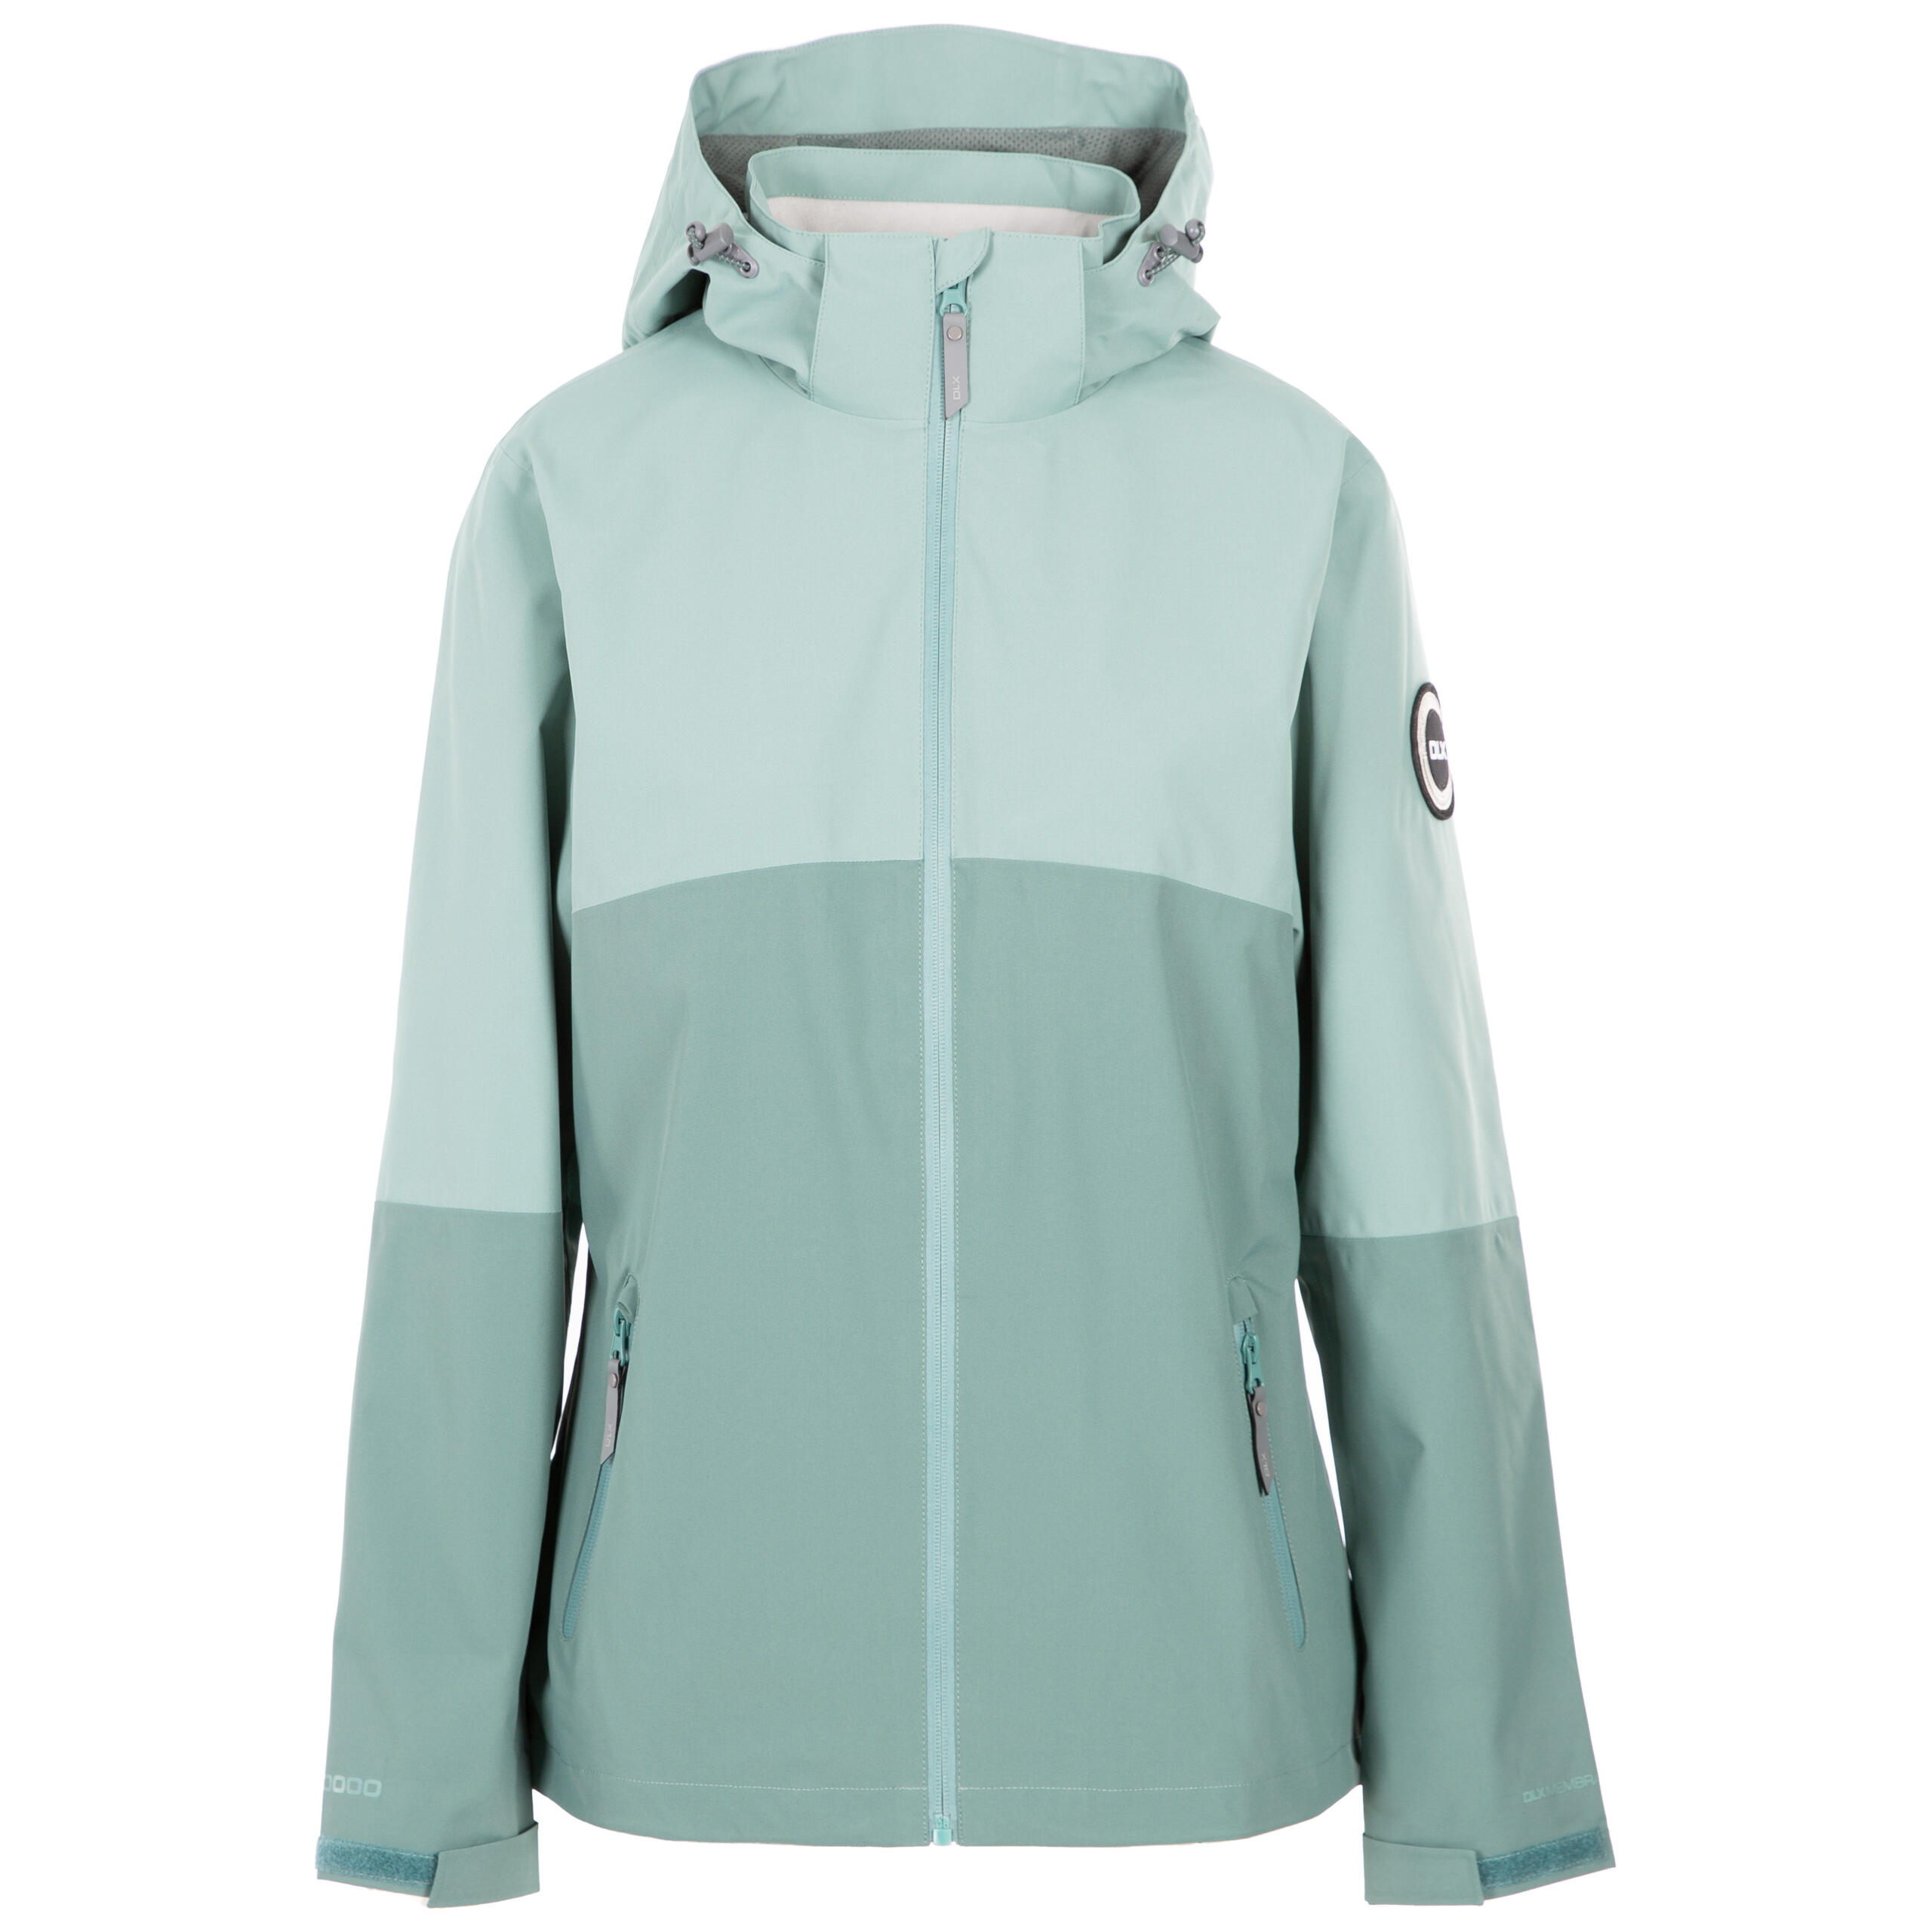 DLX Womens Waterpoof Jacket Removable Hood Quincy